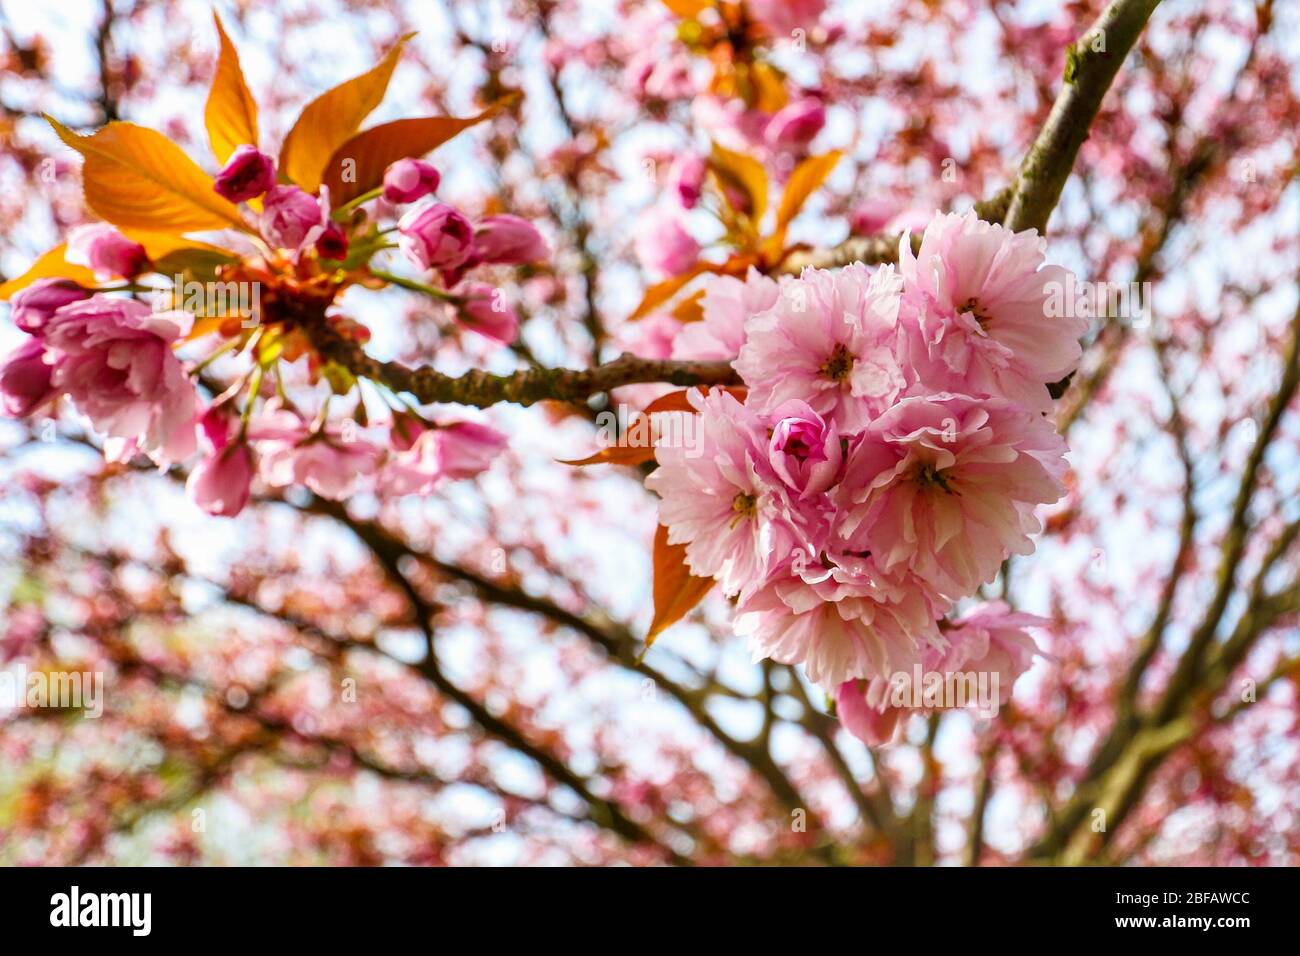 Closeup of the cherry blossom (Sakura) on a Japanese Cherry tree (Prunus serrulata). In Japanese culture, the spring blossom is celebrated as Hanami. Stock Photo